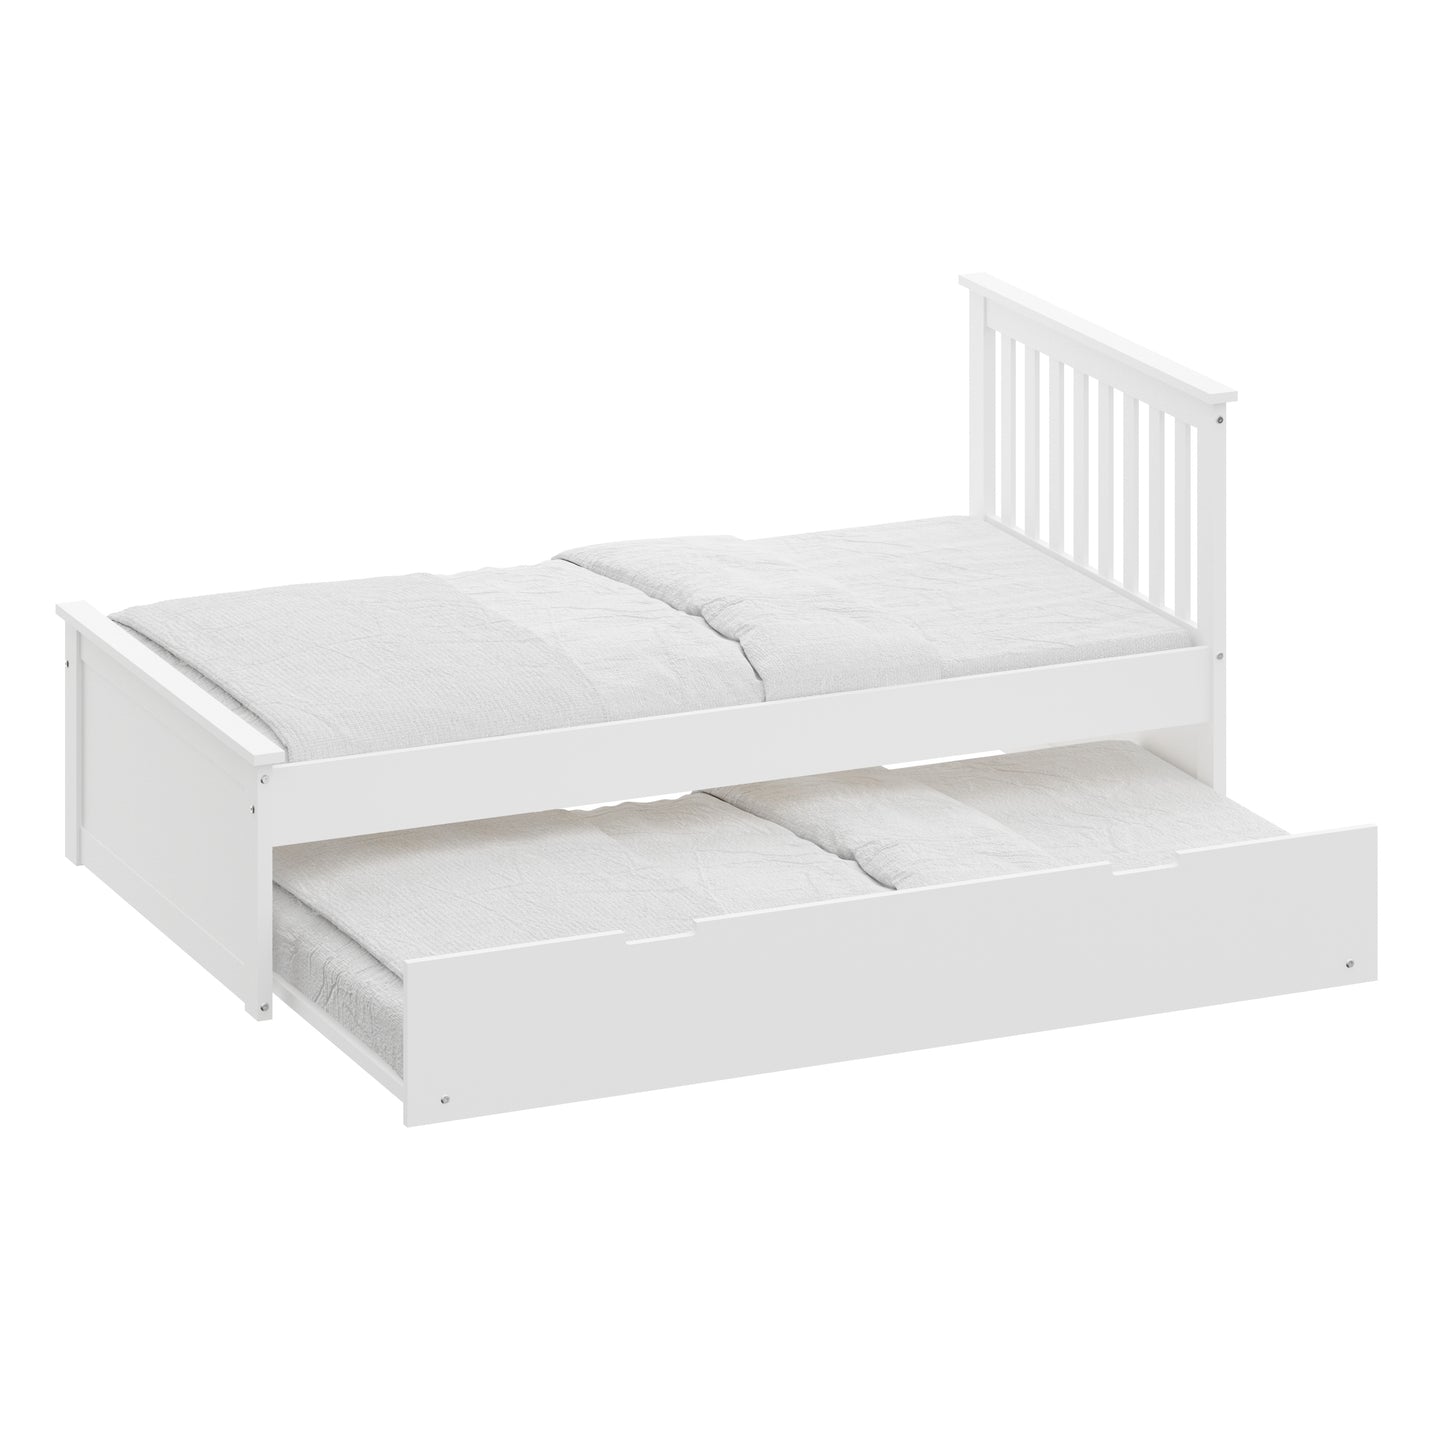 Yes4wood White Twin Bed with Trundle, Solid Wood Malibu Bed Frame with Twin Size Pull-Out Trundle for Kids and Toddlers